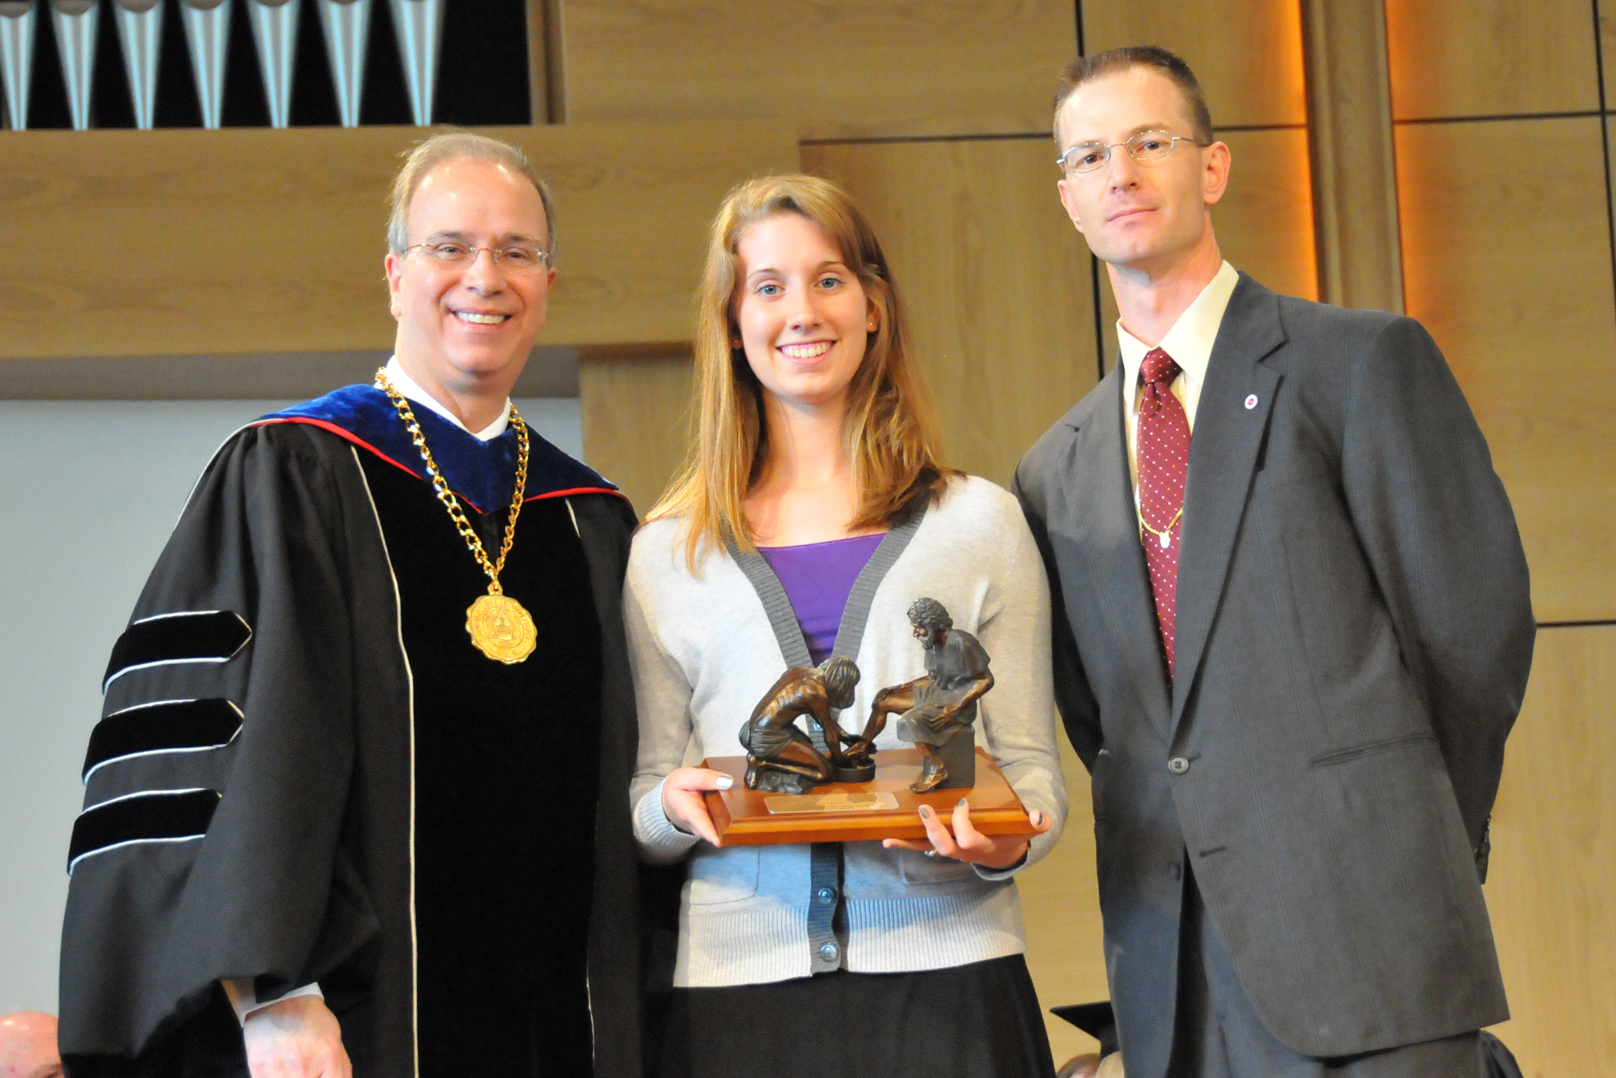 Olivia Brainard of Somerset, Ky. receives the Servant Leadership Award from Campbellsville University president Michael V. Carter, left, and Josh Anderson, dean of student services, at Honors and Awards Day. (Campbellsville University Photo by Munkh-Amgalan Galsanjamts)